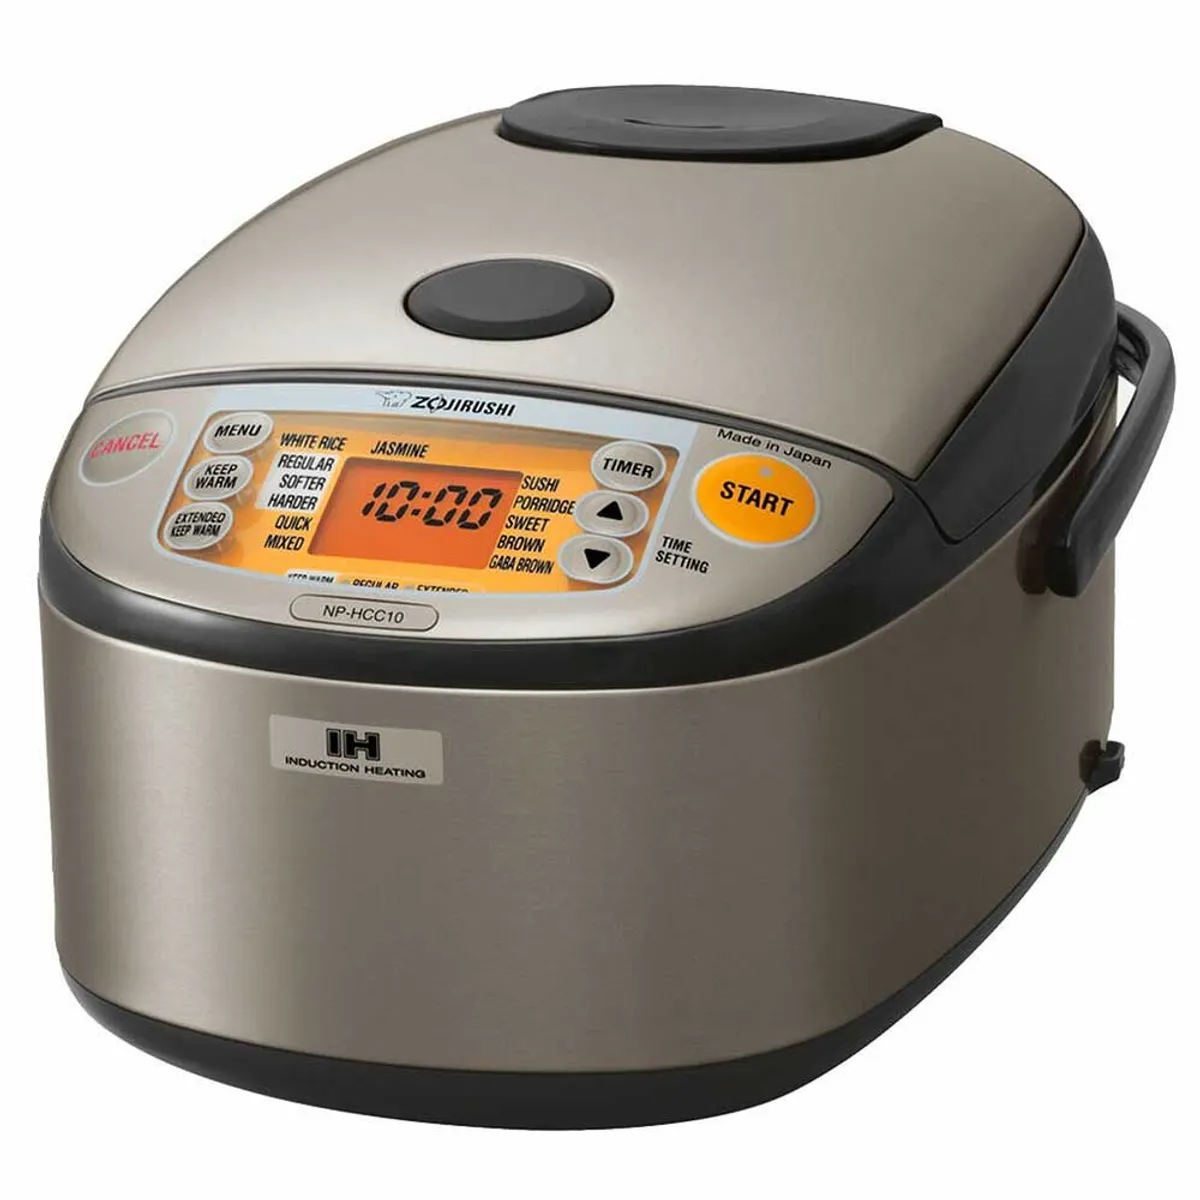 Induction-Heating Rice Cooker